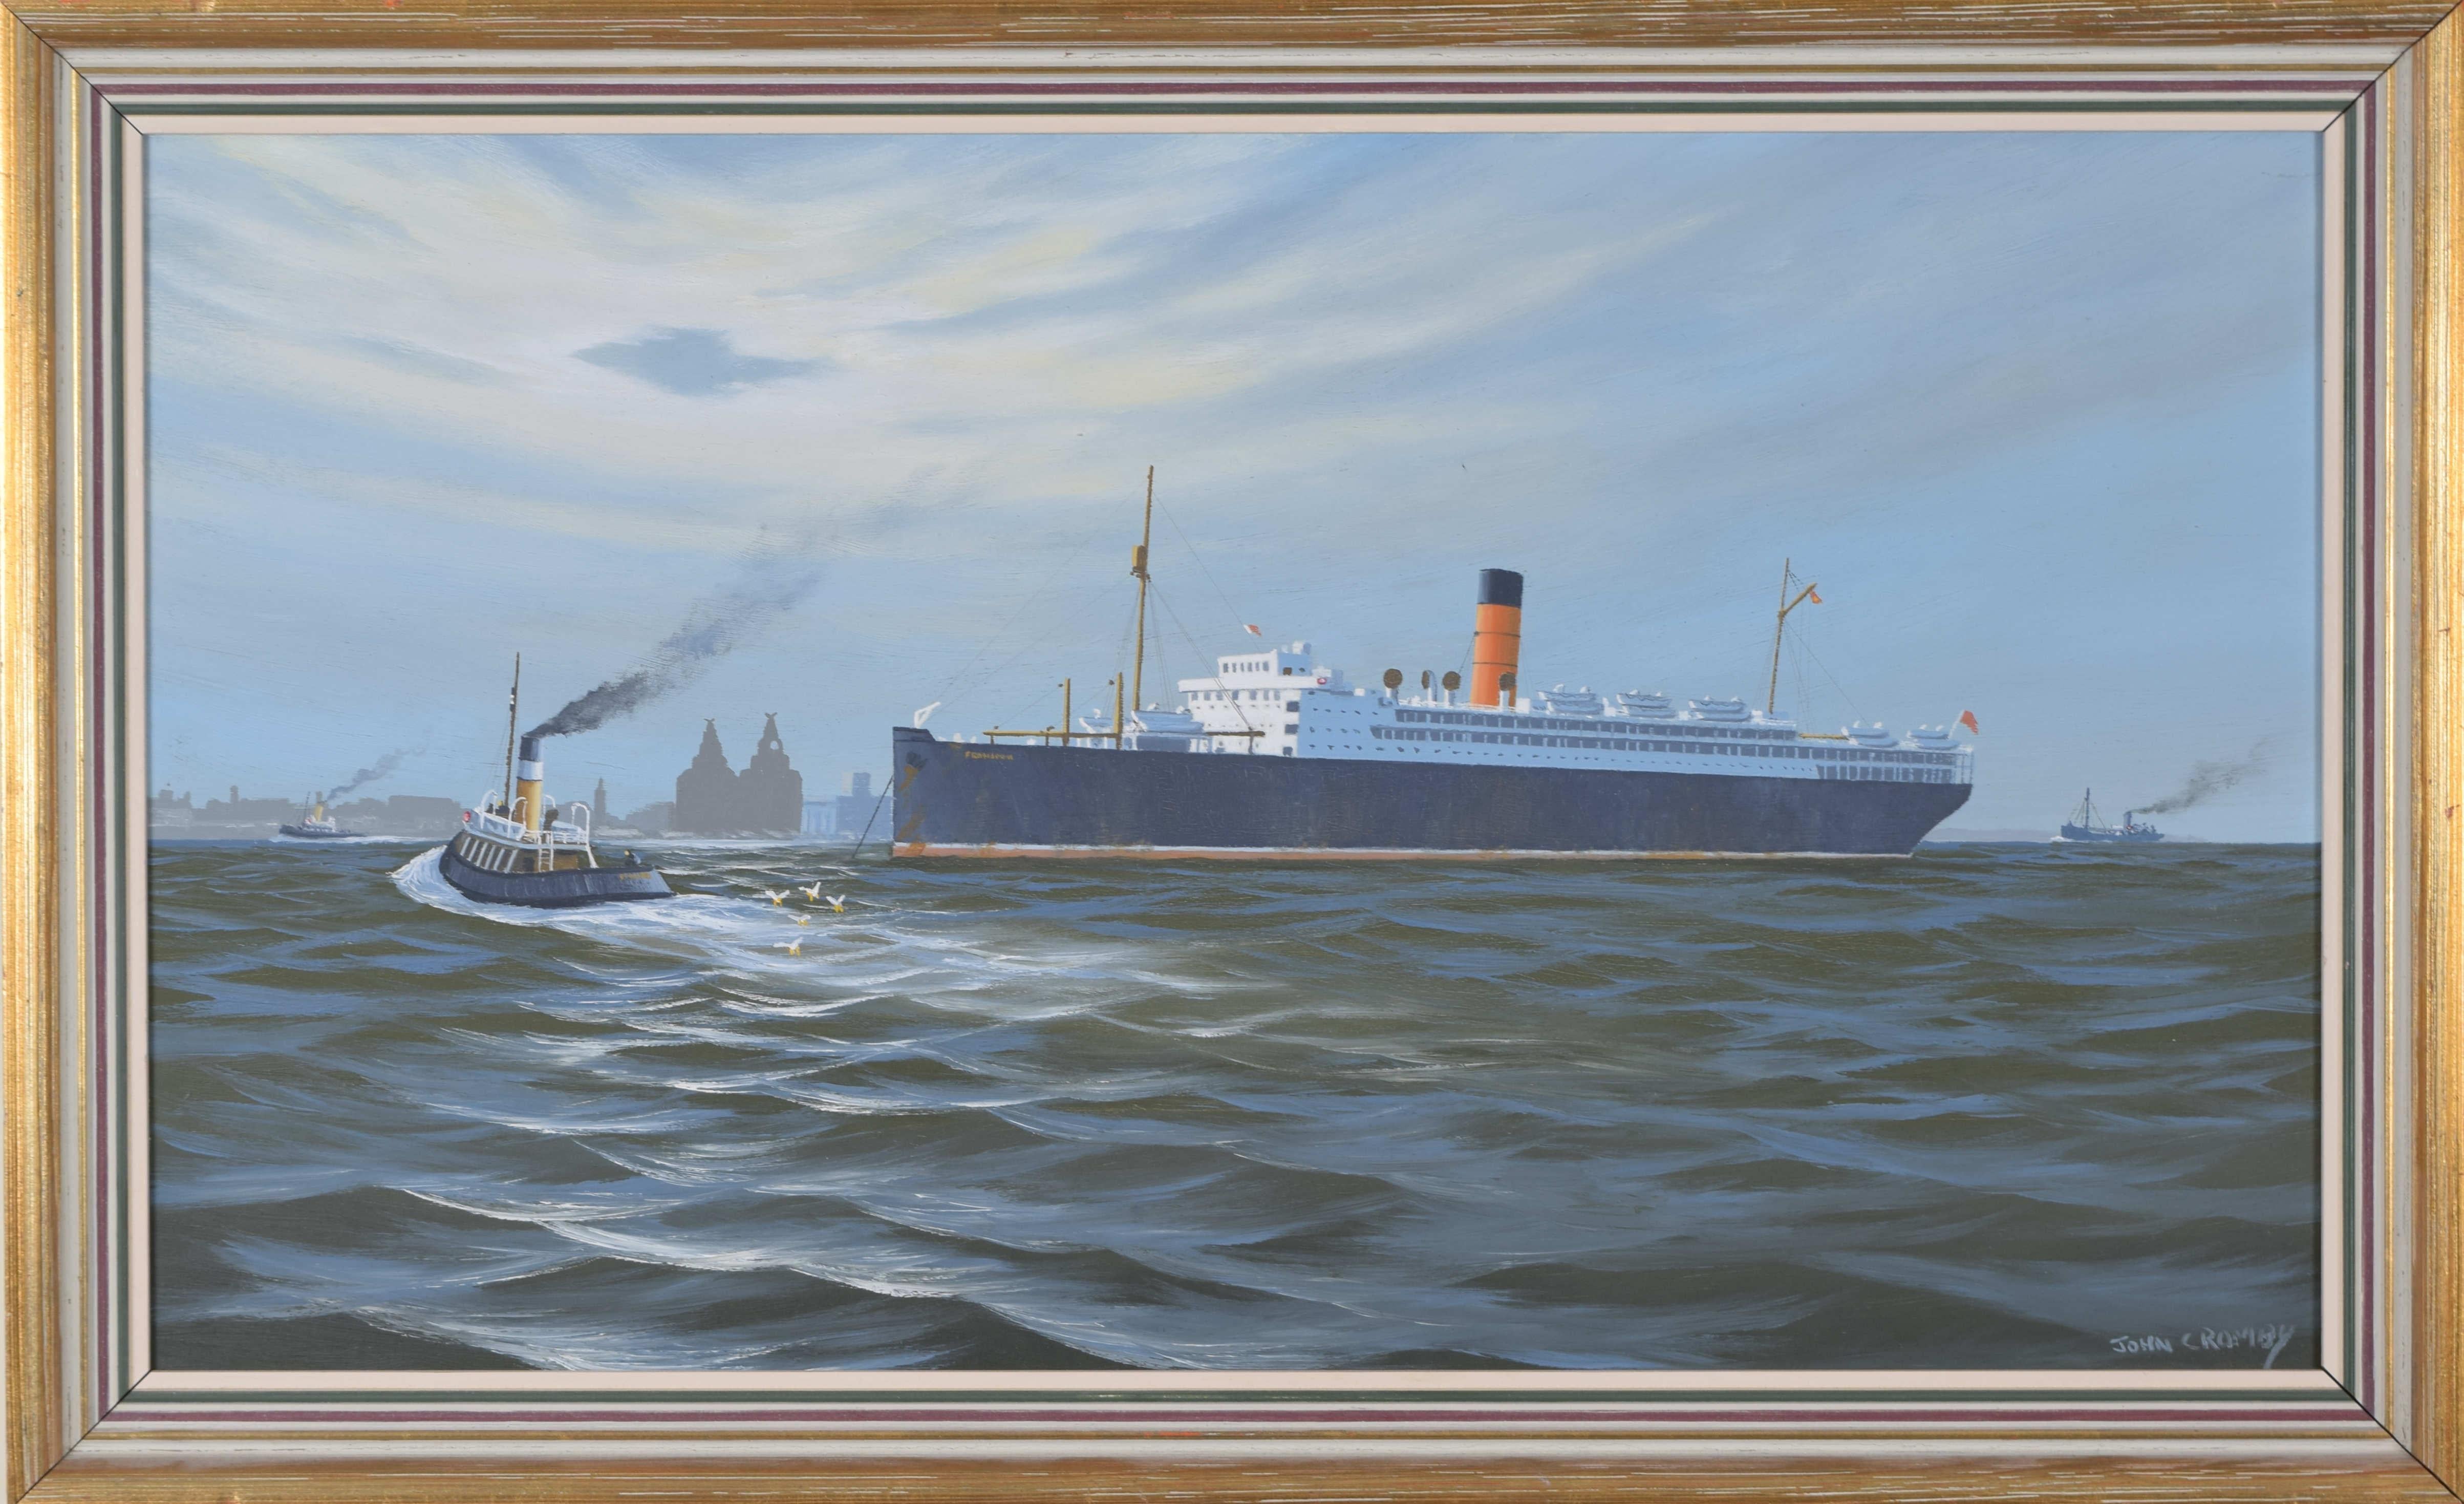 A Passenger Ship in Liverpool Harbour oil painting by John Cromby 1